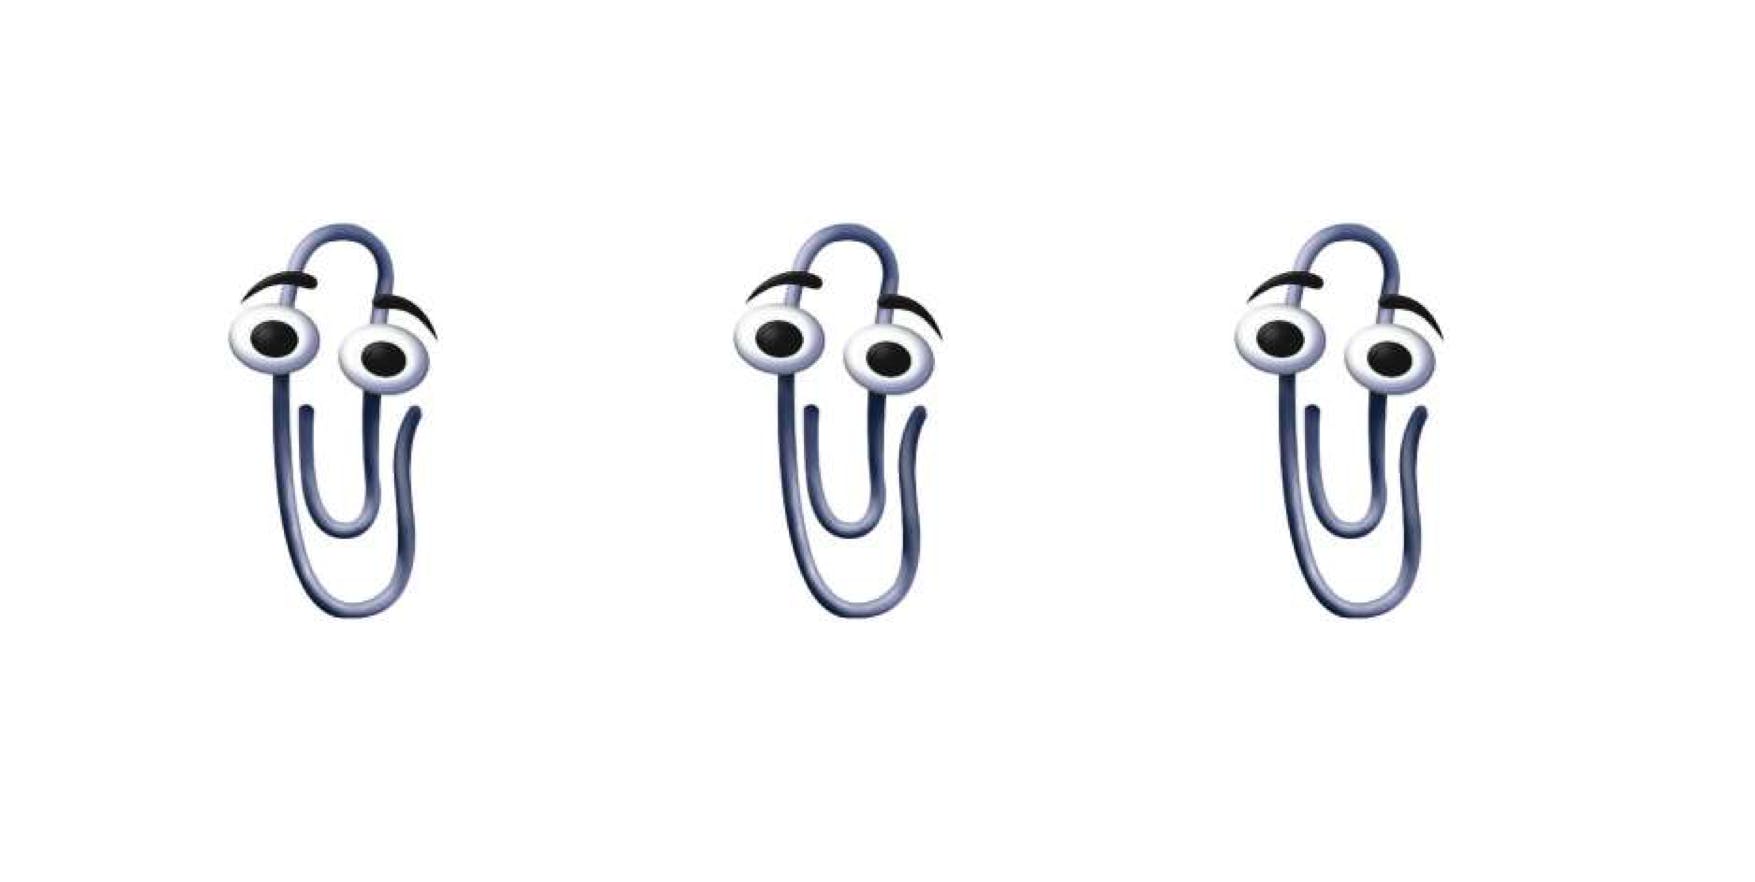 How Microsoft's Clippy Transformed From Hated Assistant to Beloved Icon